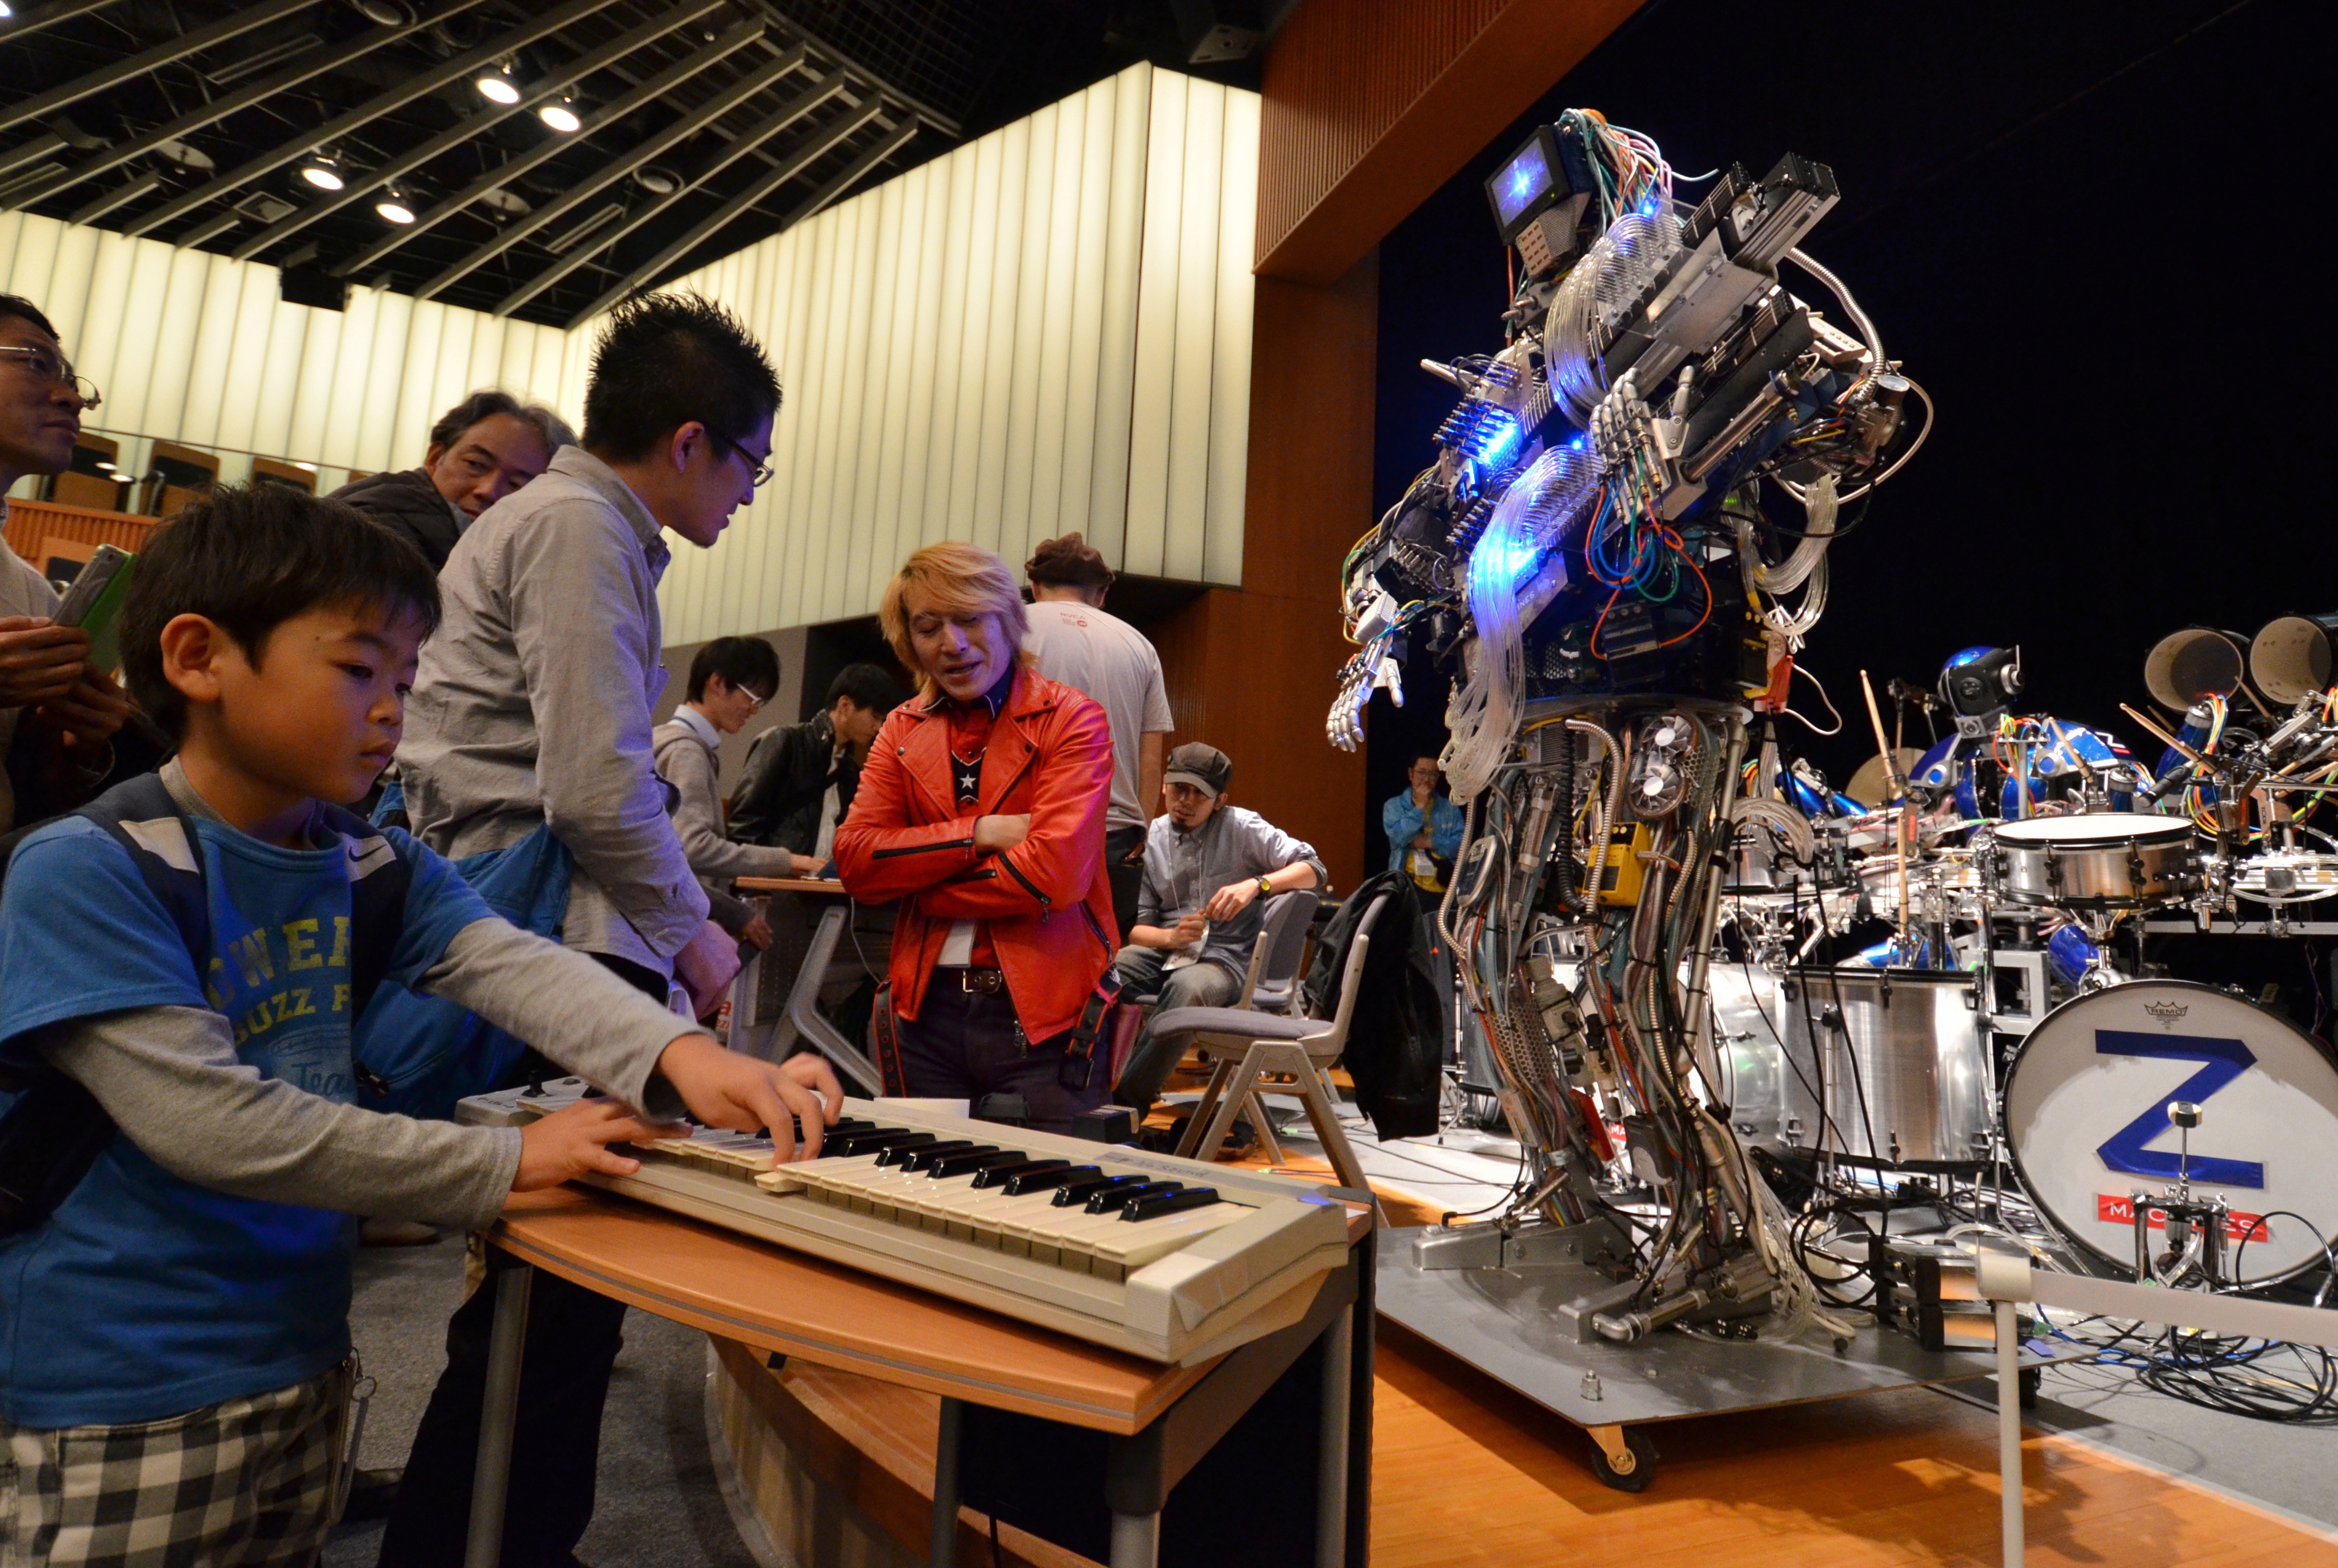 A boy plays a keyboard to control robot guitarist "Mach", a member of a robot rock band "Z-Machines", during the two day art and technology event "Maker Faire Tokyo" at the National Museum of Emerging Science and Innovation in Tokyo on November 3, 2013. (YOSHIKAZU TSUNO&mdash;AFP/Getty Images)